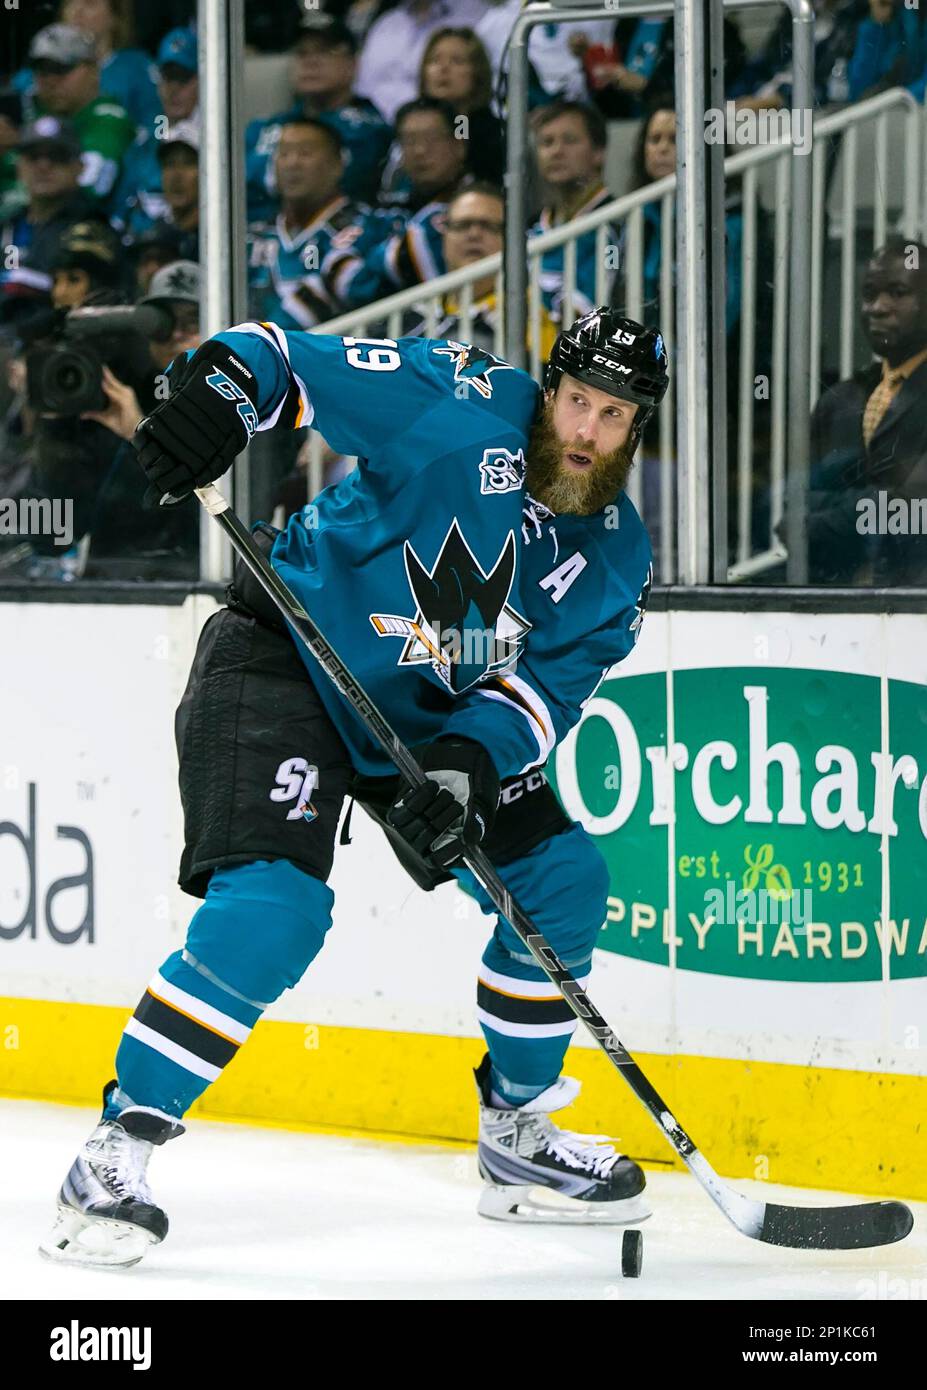 January 21, 2015: San Jose Sharks defenseman Brent Burns (88) in action  during the NHL hockey game between the Los Angeles Kings and the San Jose  Sharks at the SAP Center in